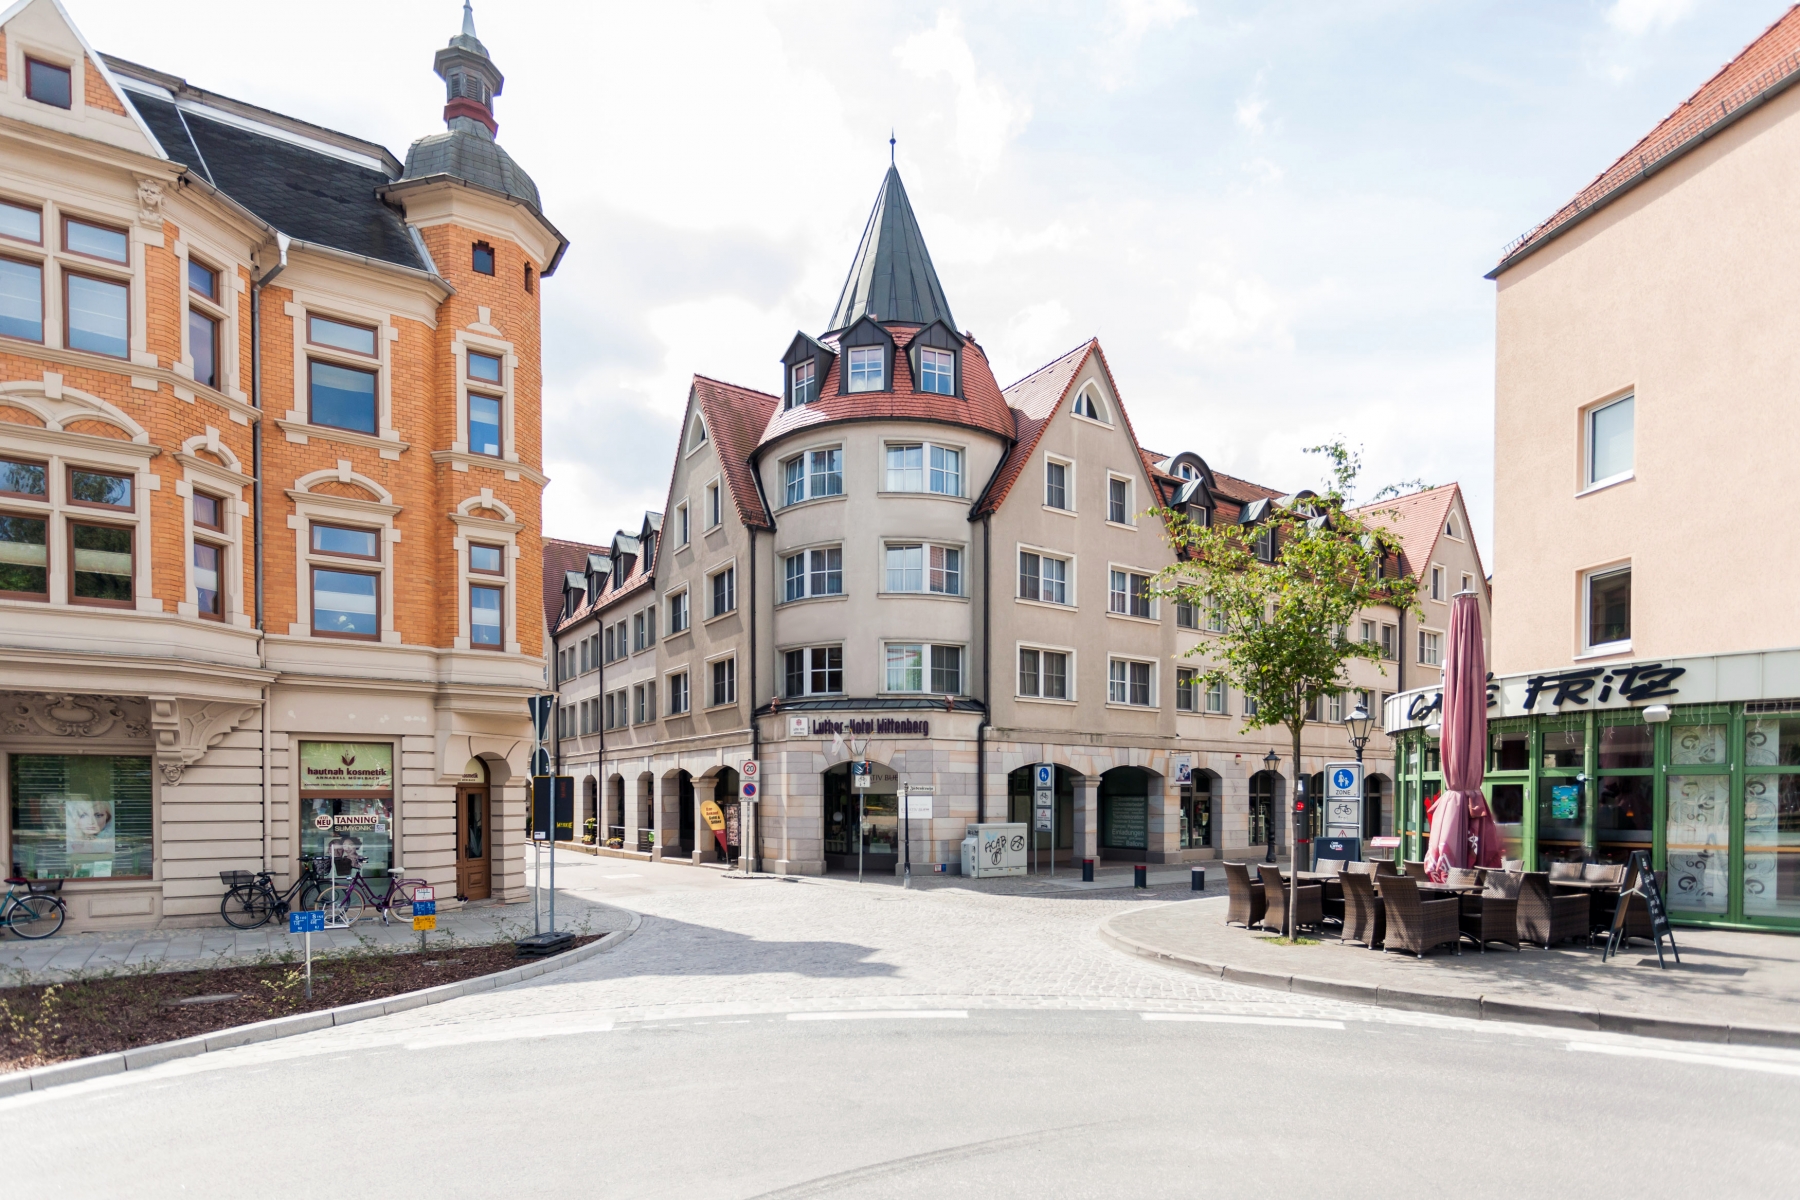 Luther-Hotel Wittenberg <br/>62.66 ew <br/> <a href='http://vakantieoplossing.nl/outpage/?id=e7d279b1eaa997101c14ad2a53cae23e' target='_blank'>View Details</a>